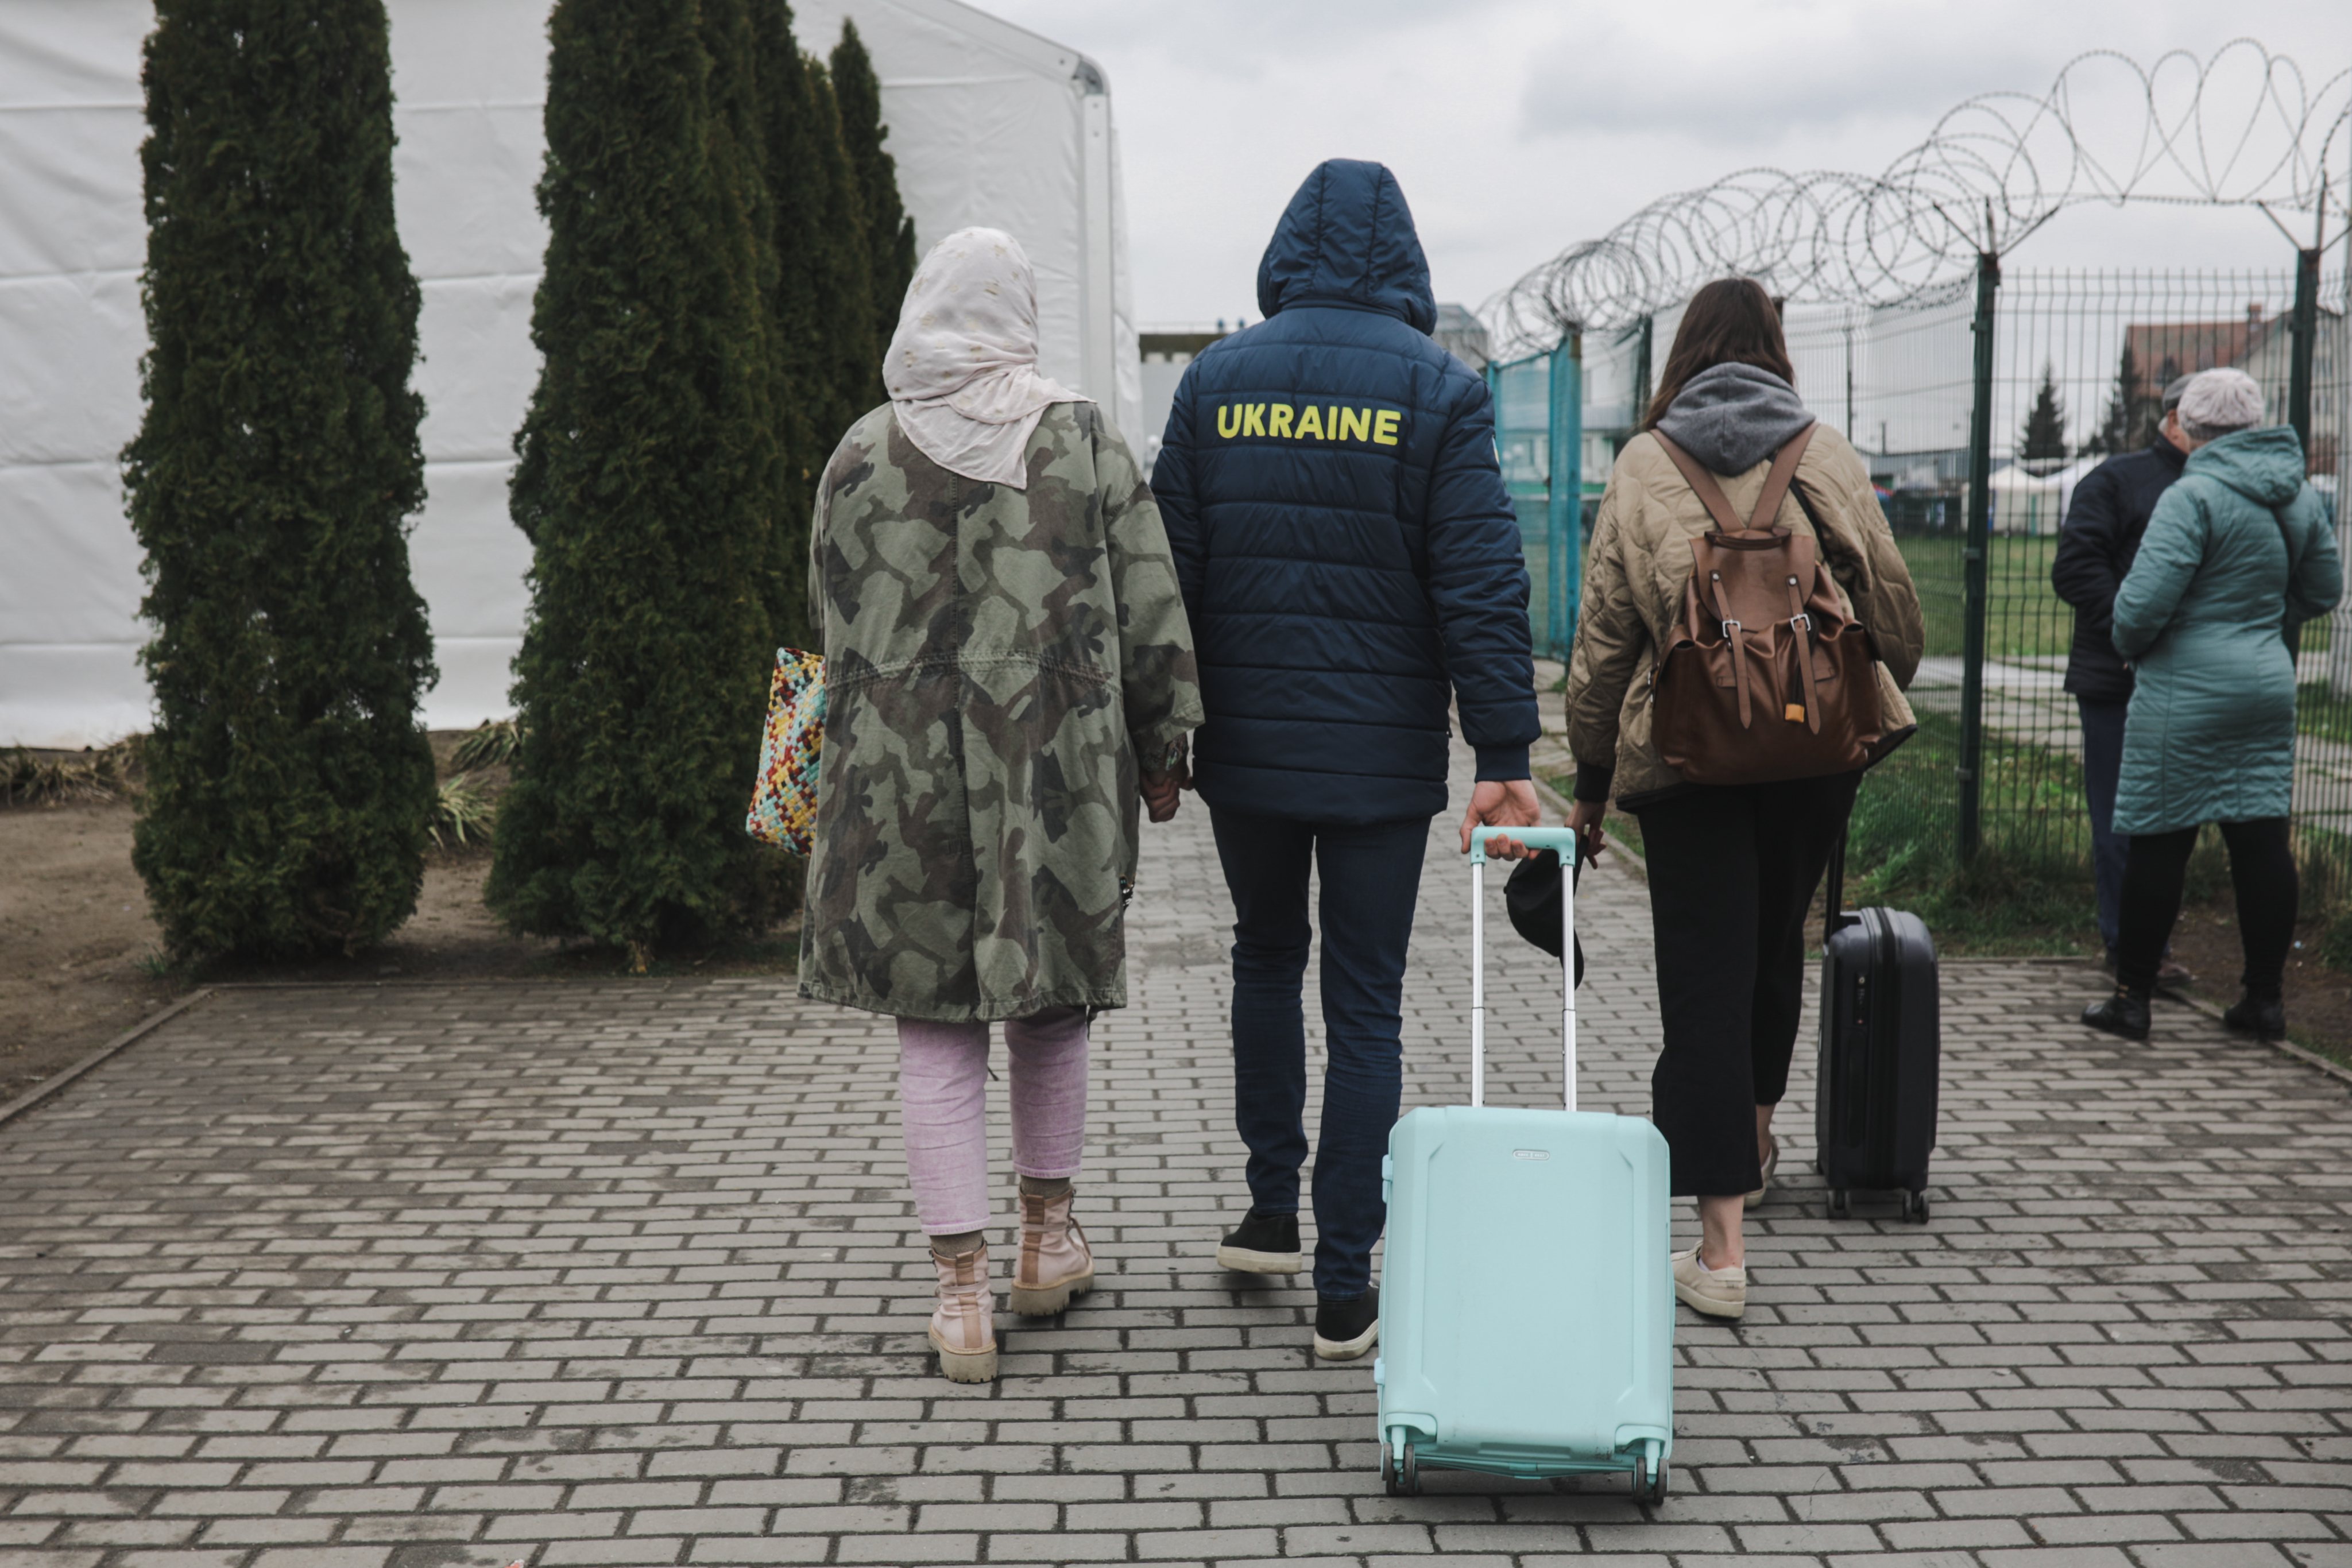 Ukrainian refugees come back to their relative in Lviv